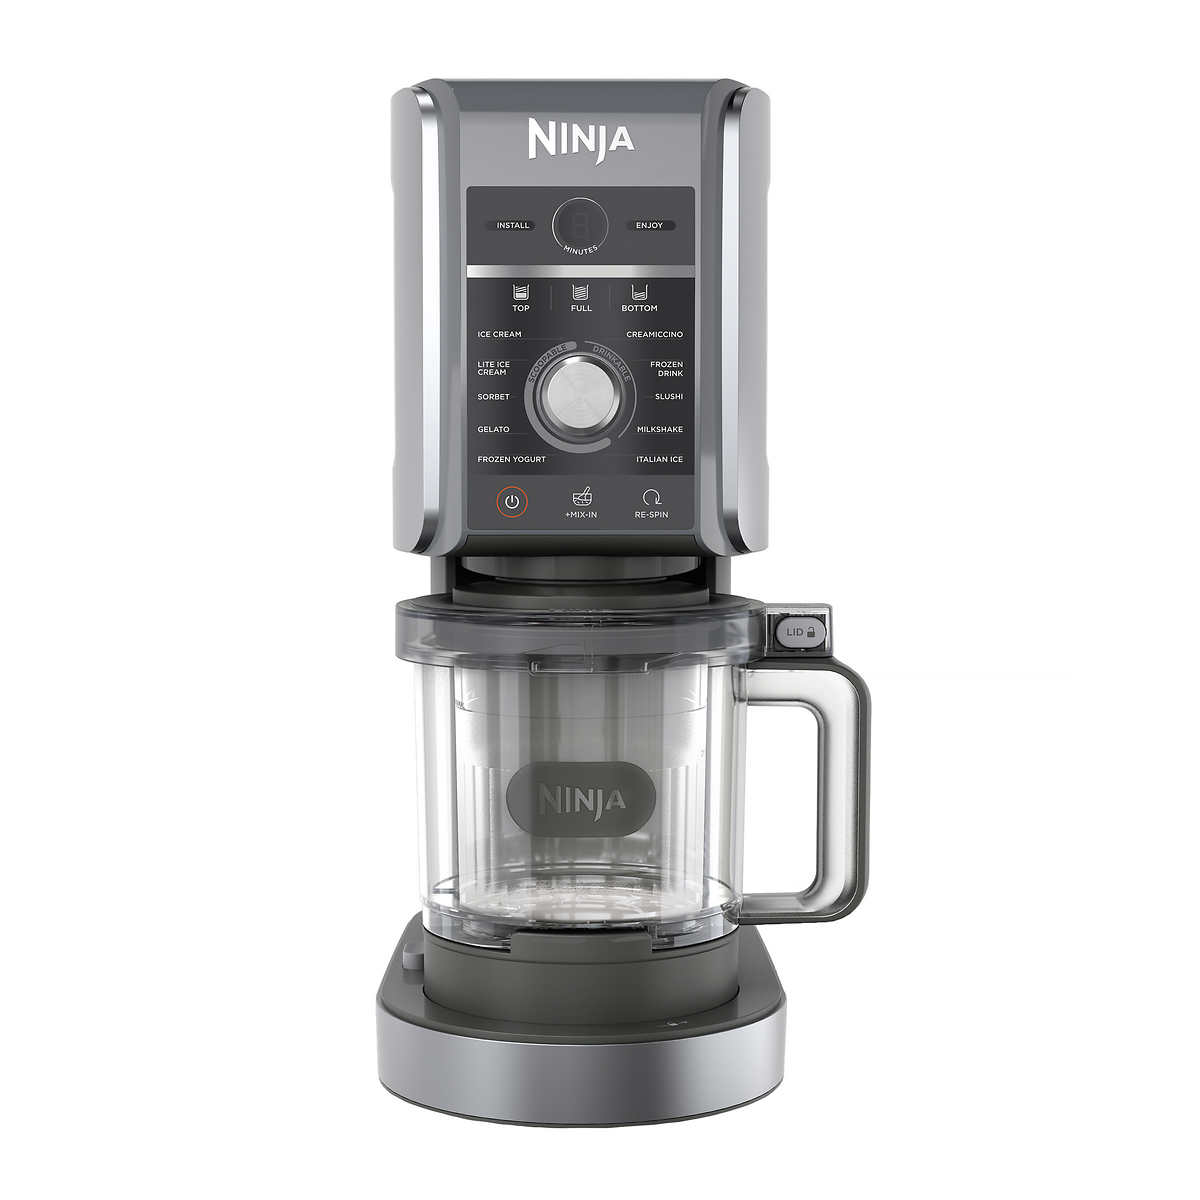 Ninja CREAMi Breeze: 7-in-1 Ice Cream Maker comes with (4) Pint Containers